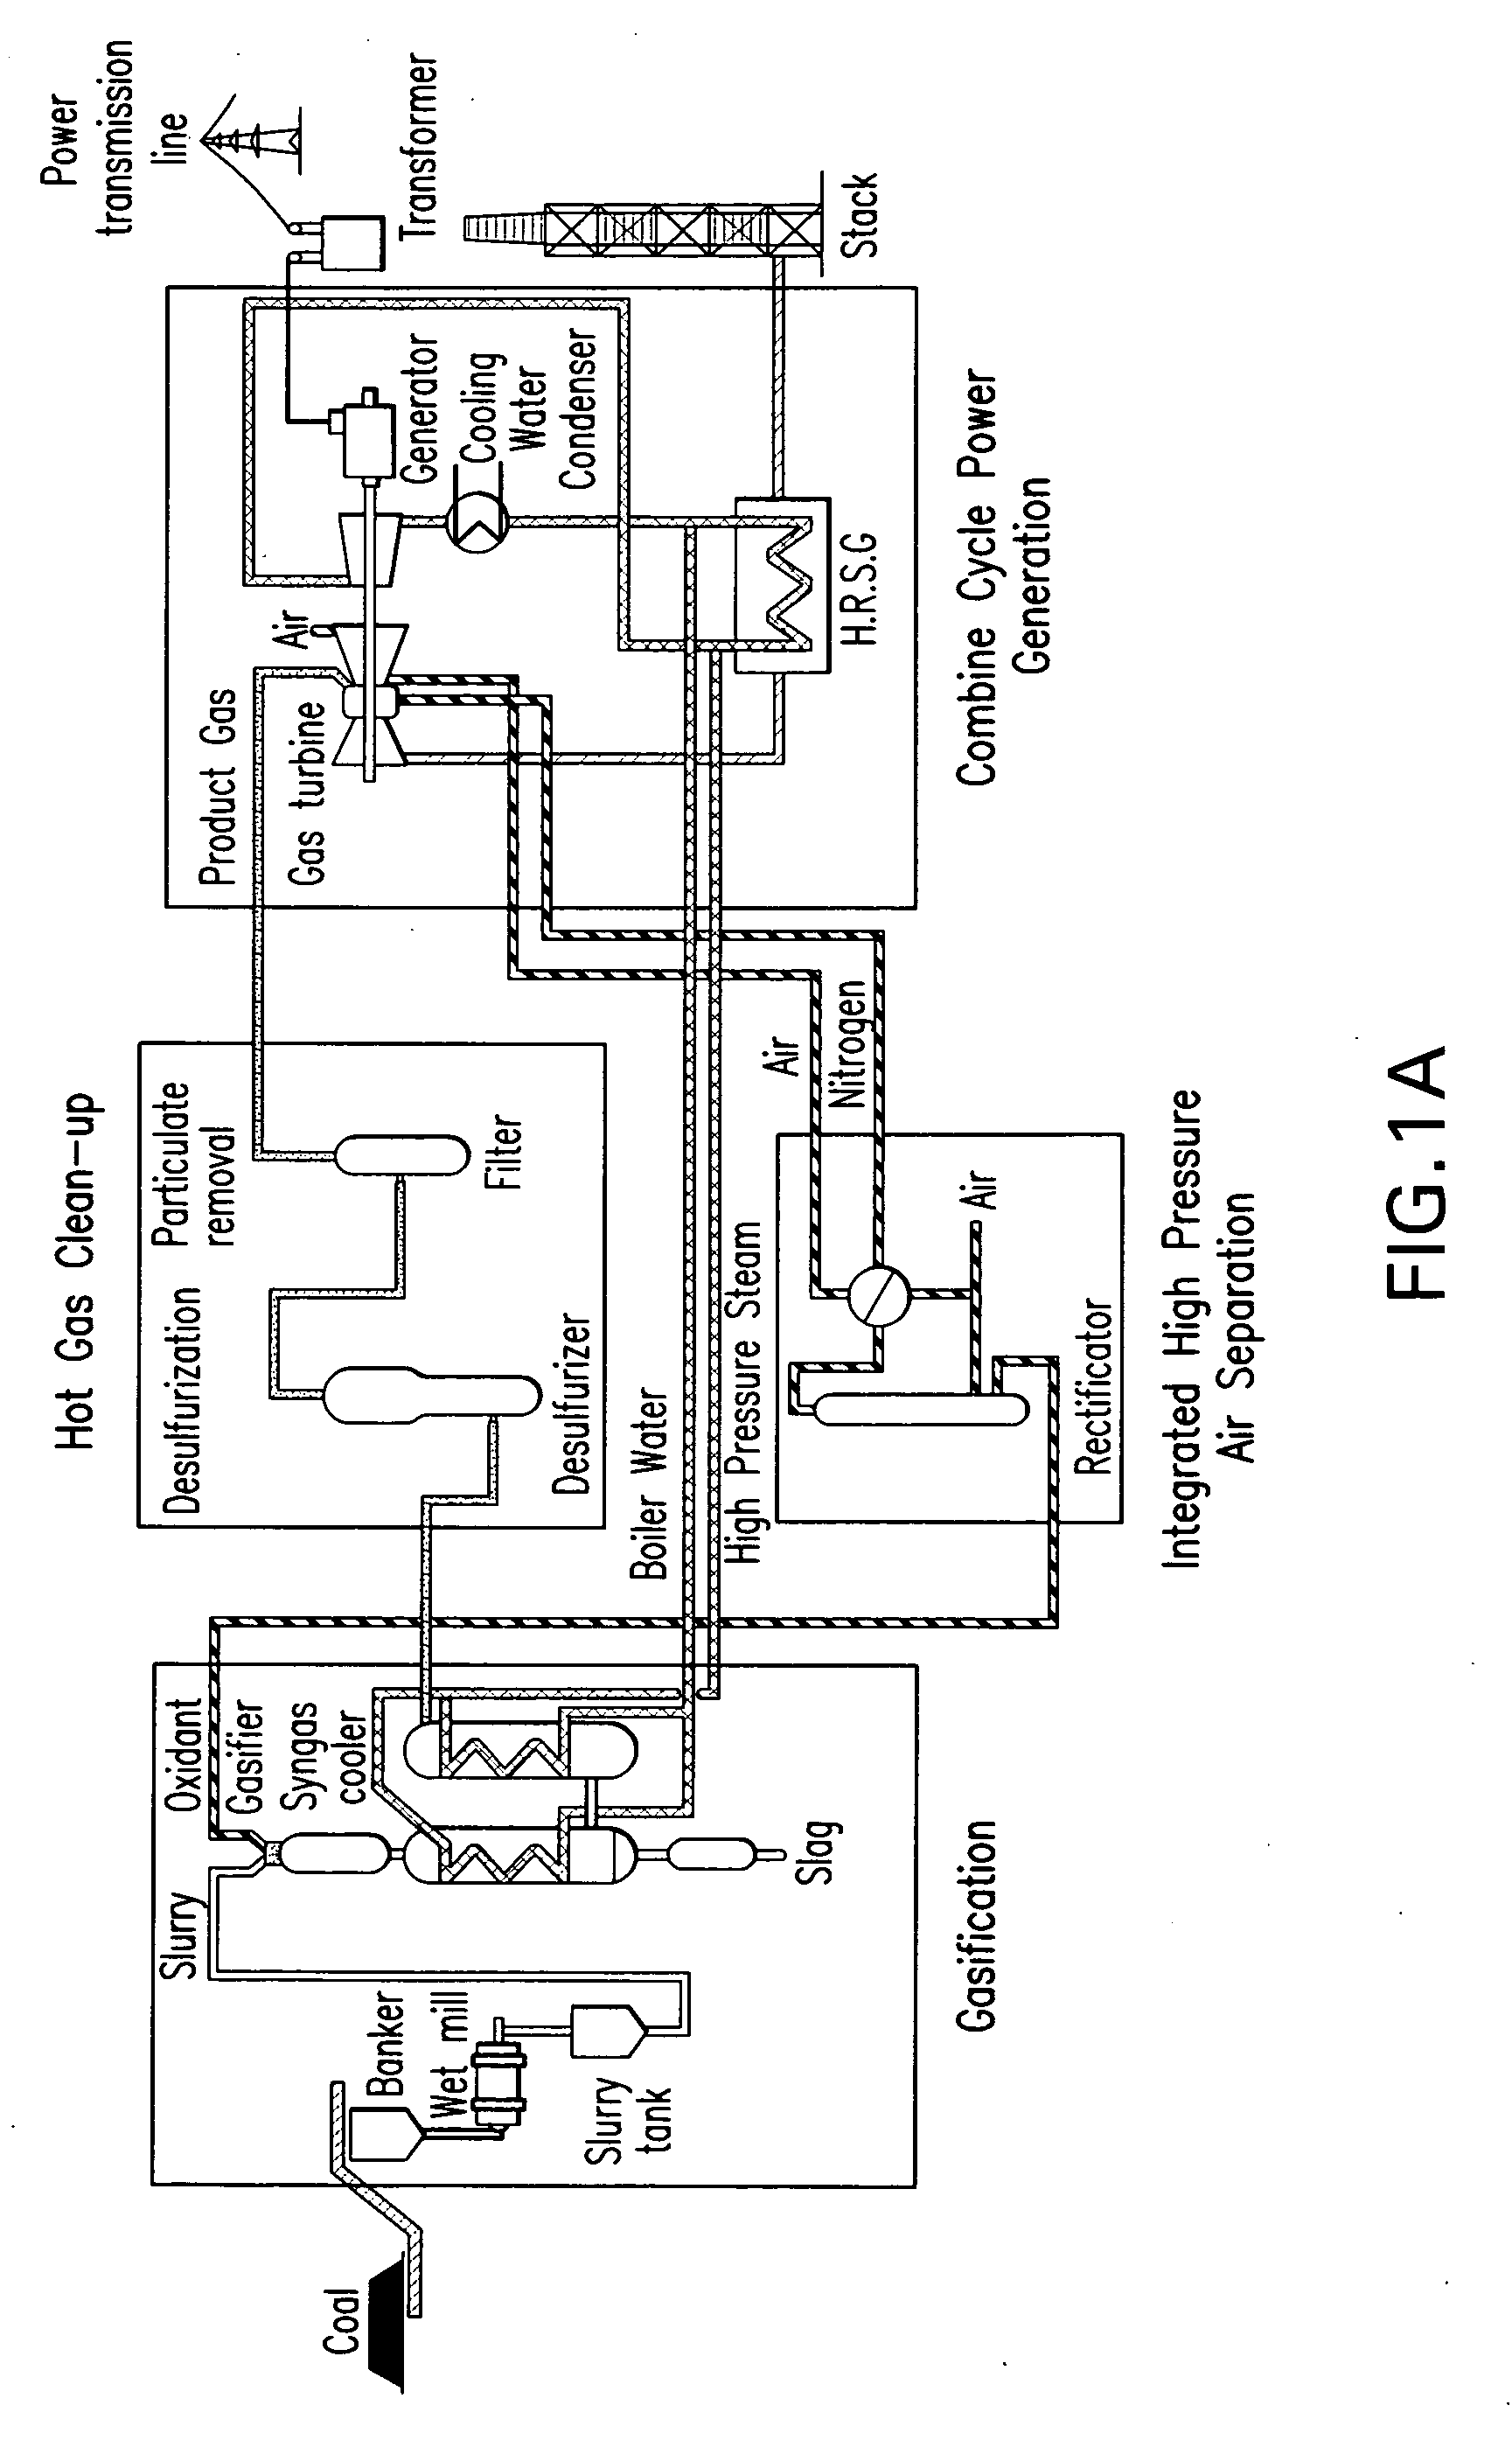 Method and apparatus for removing carbon dioxide gas from coal combustion power plants